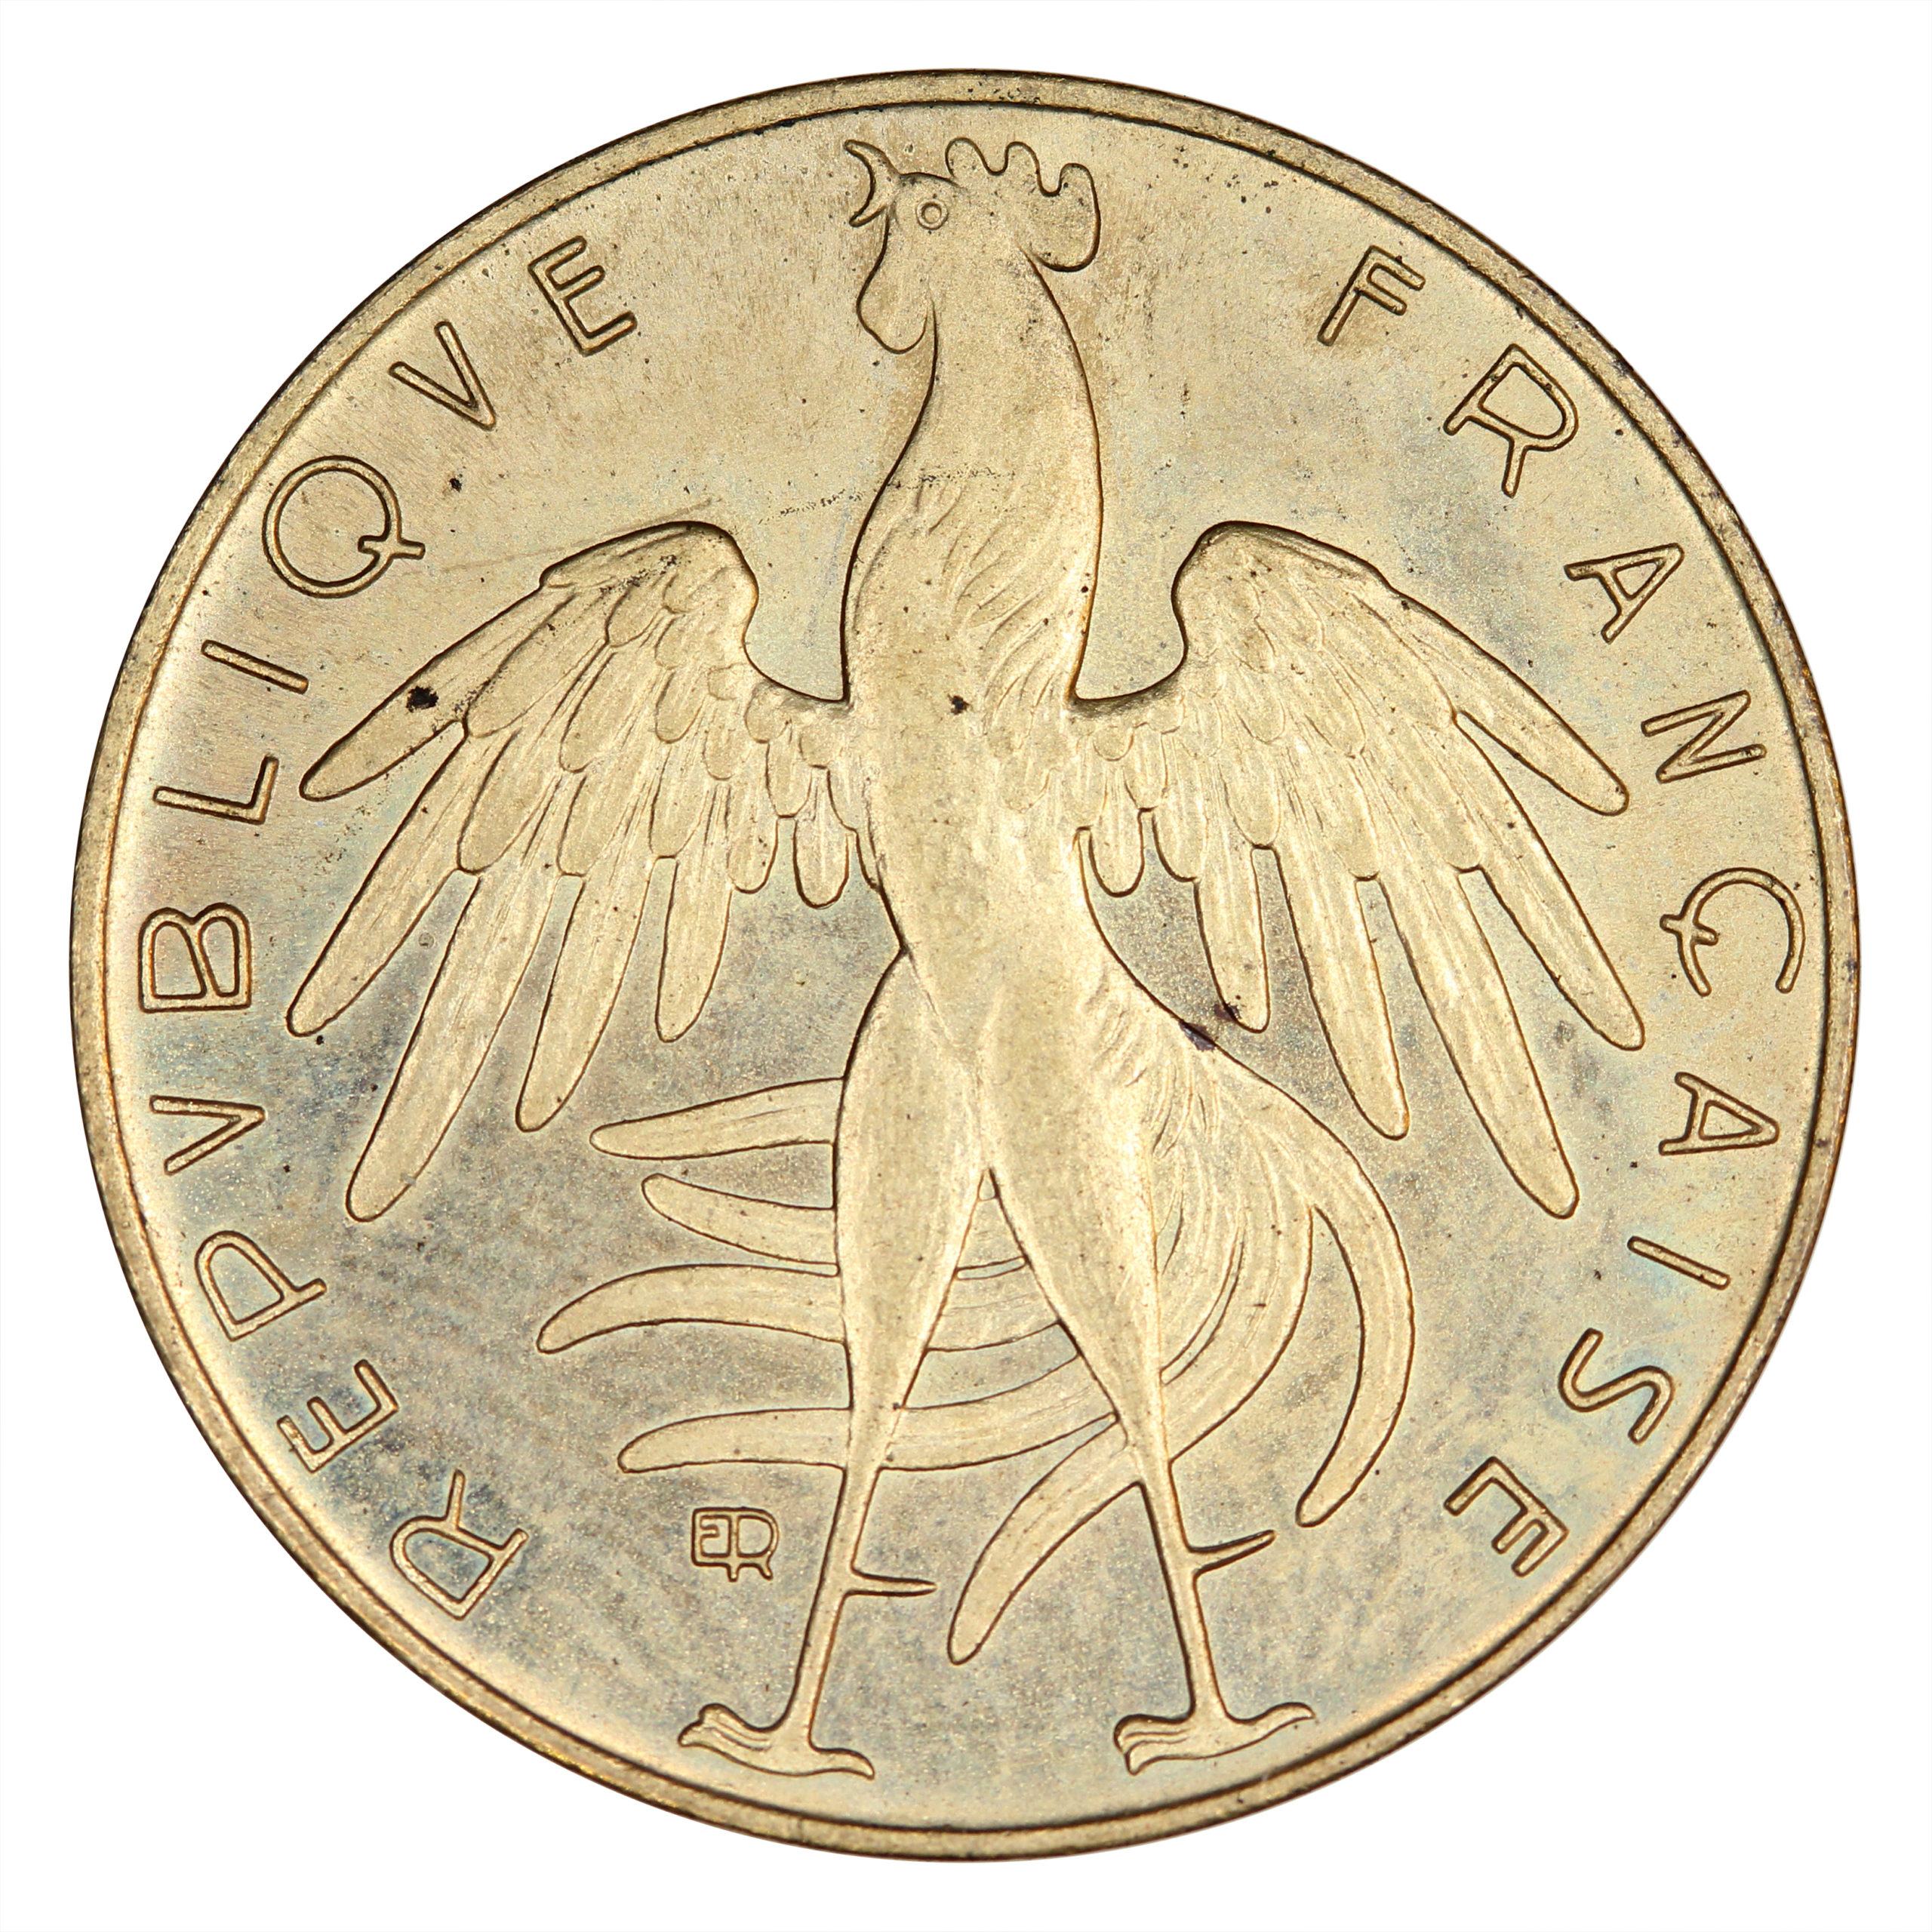 Concours 20 centimes 1961 / revers